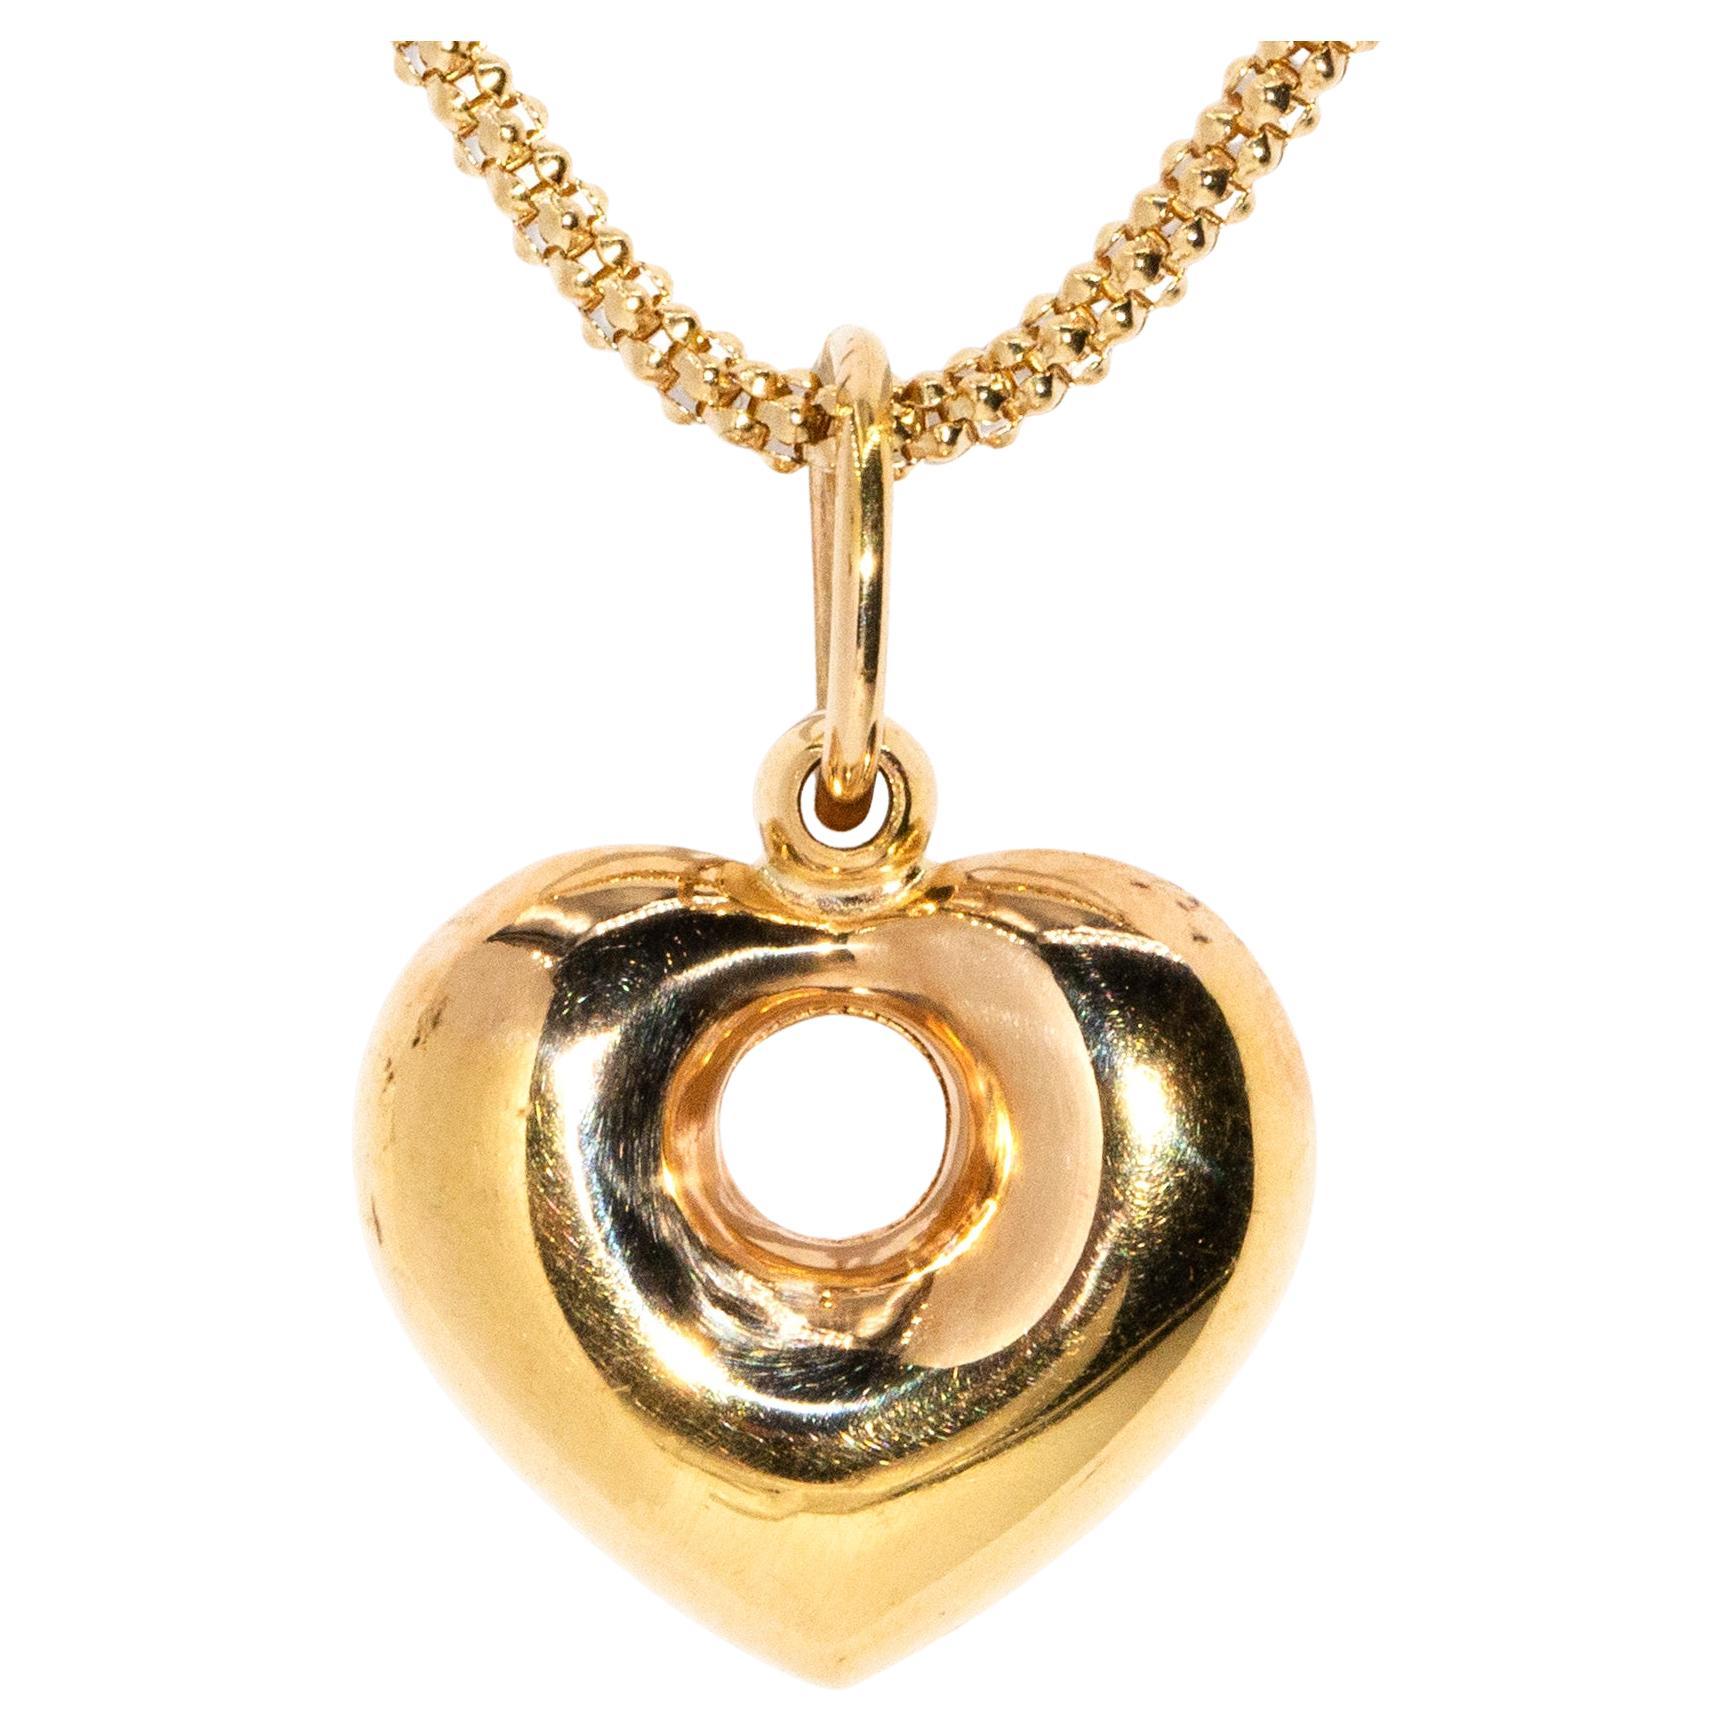 Vintage Circa 1990s 9 Carat Yellow Gold Open Puffed Heart Pendant & Chain For Sale